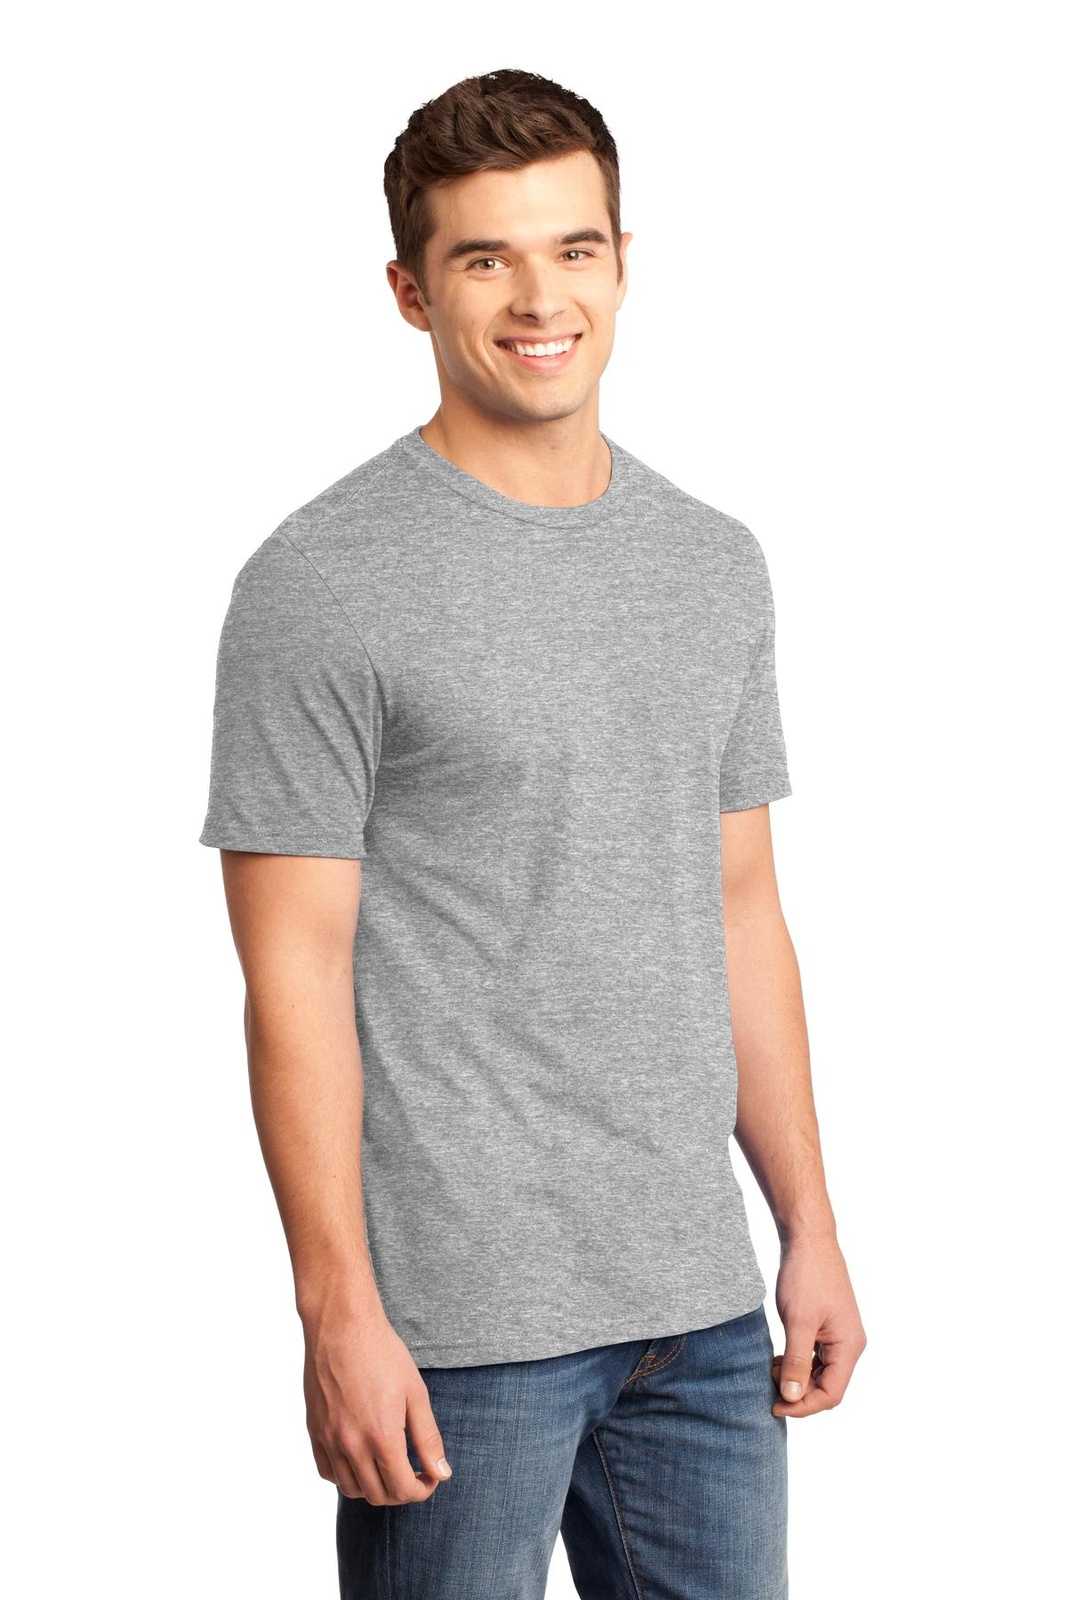 District DT6000 Very Important Tee - Light Heather Gray - HIT a Double - 4